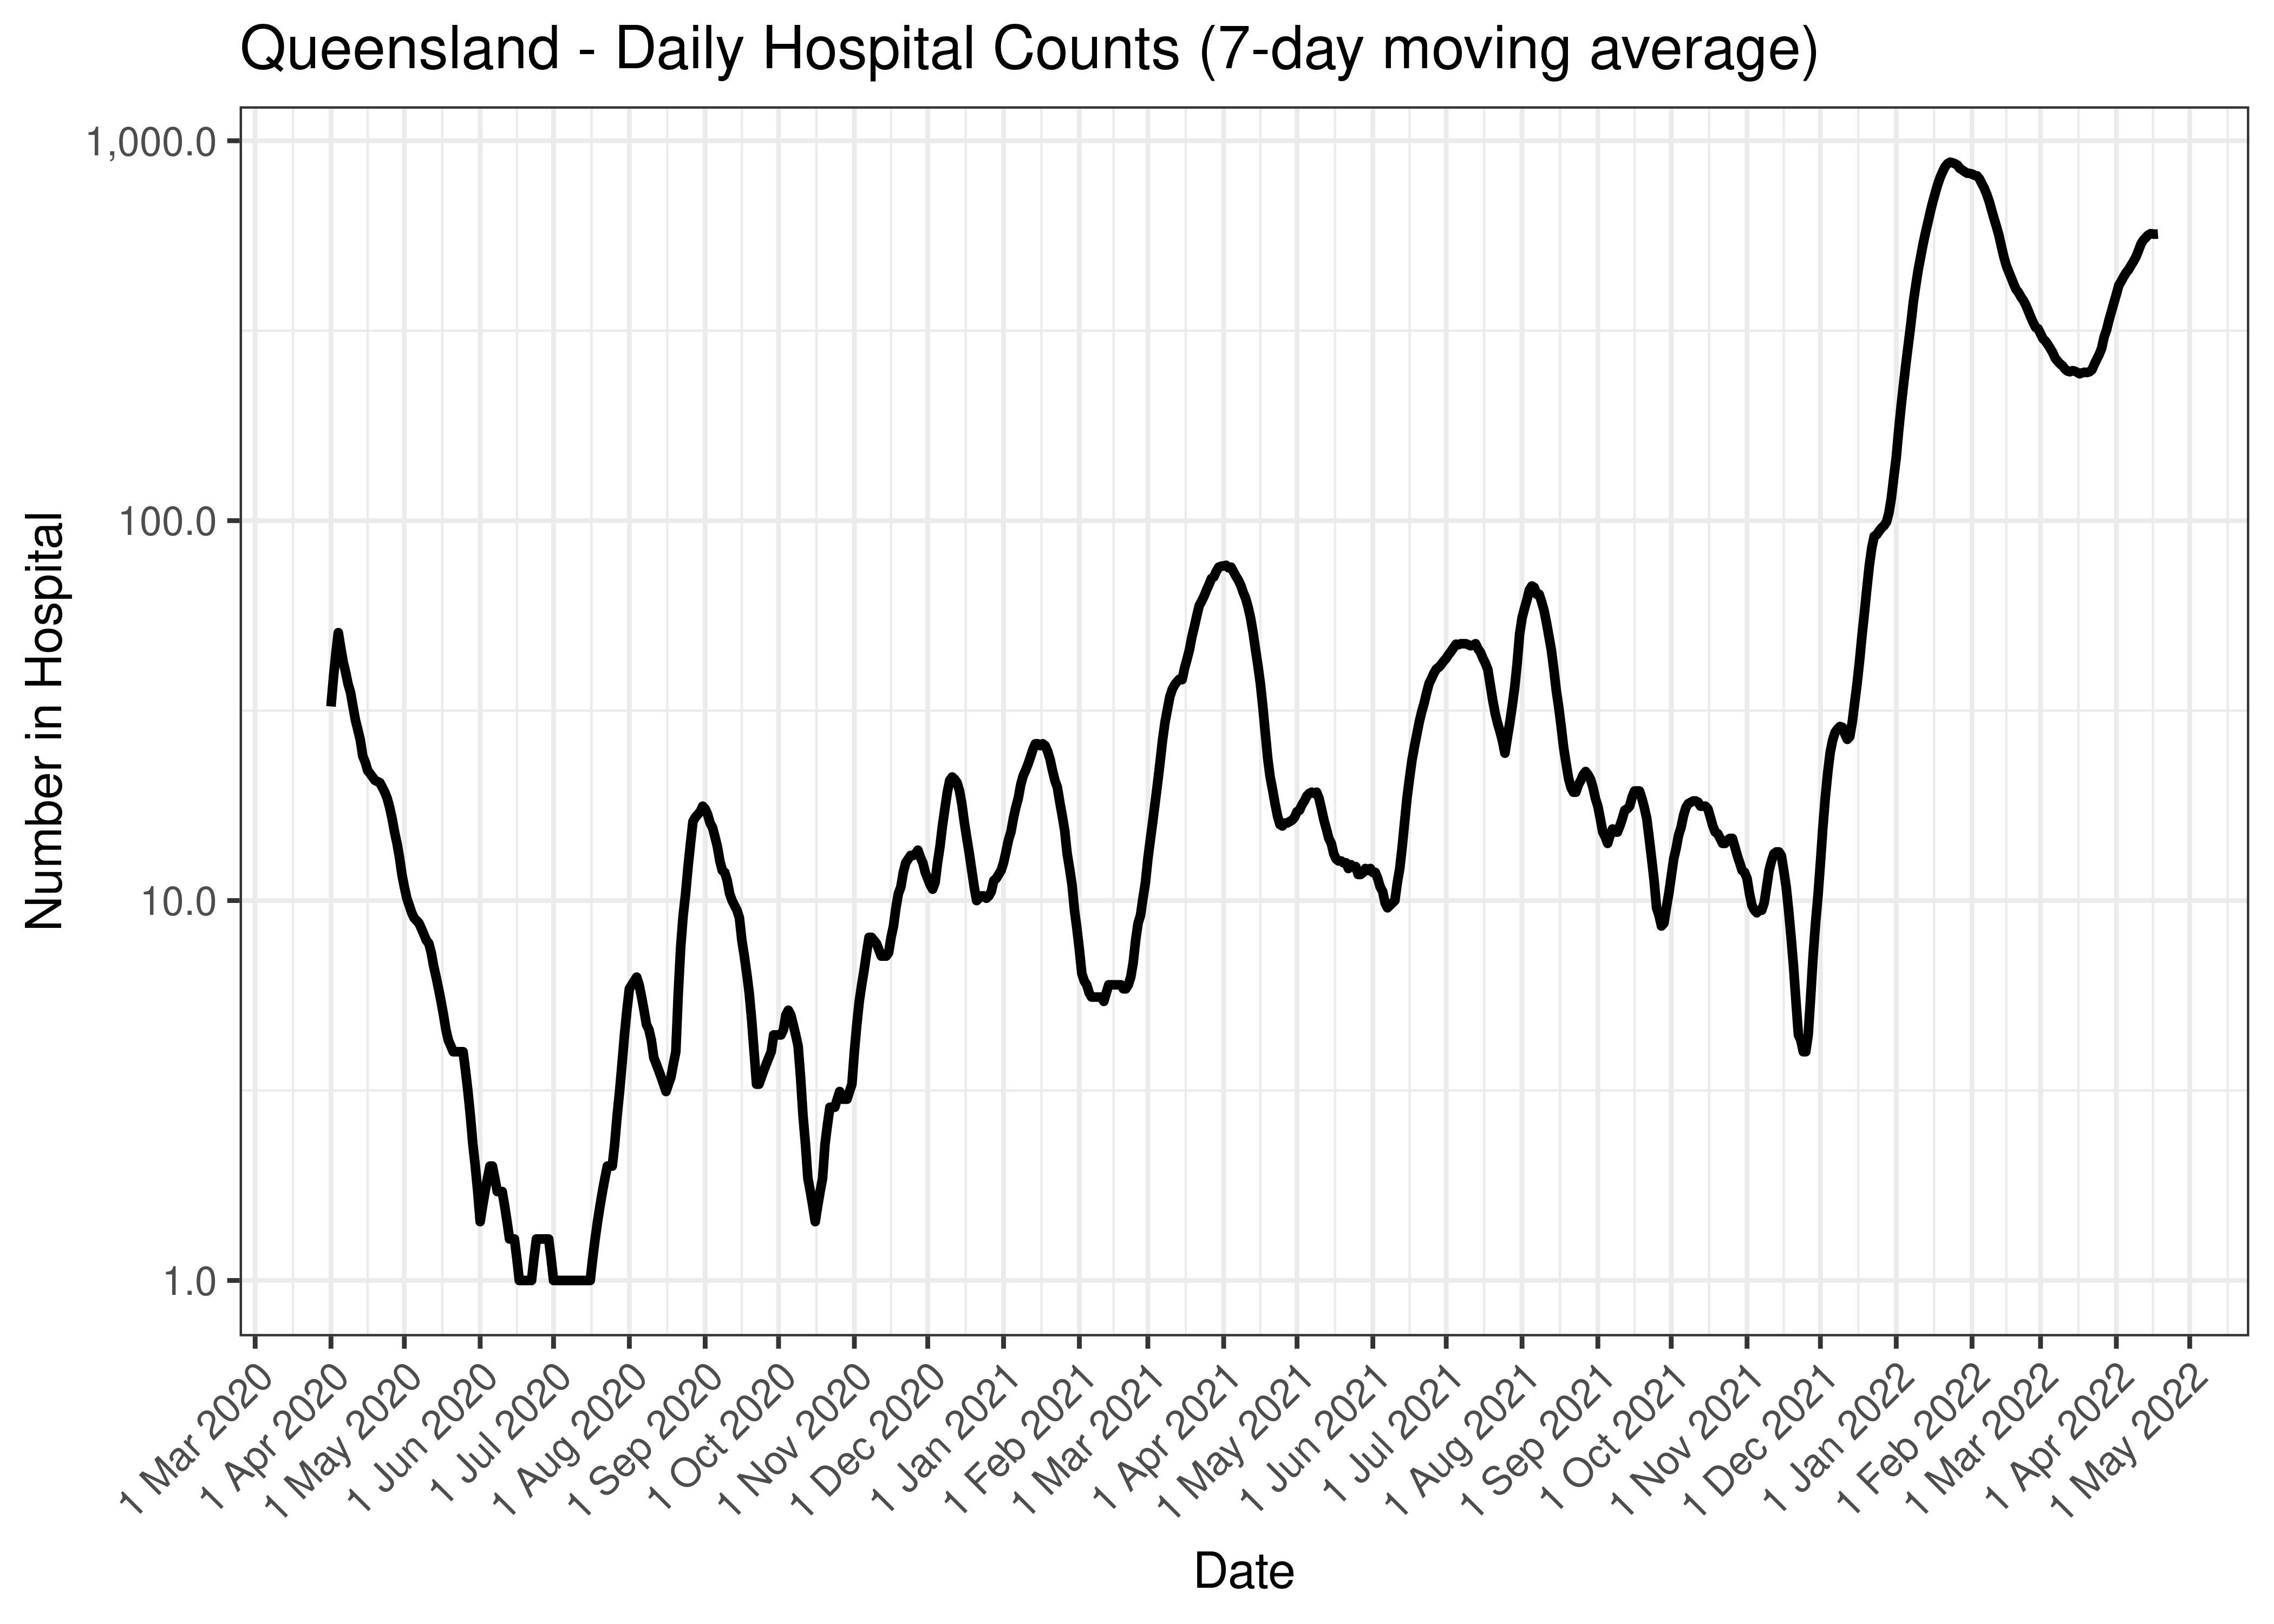 Queensland - Daily Hospital Counts (7-day moving average)